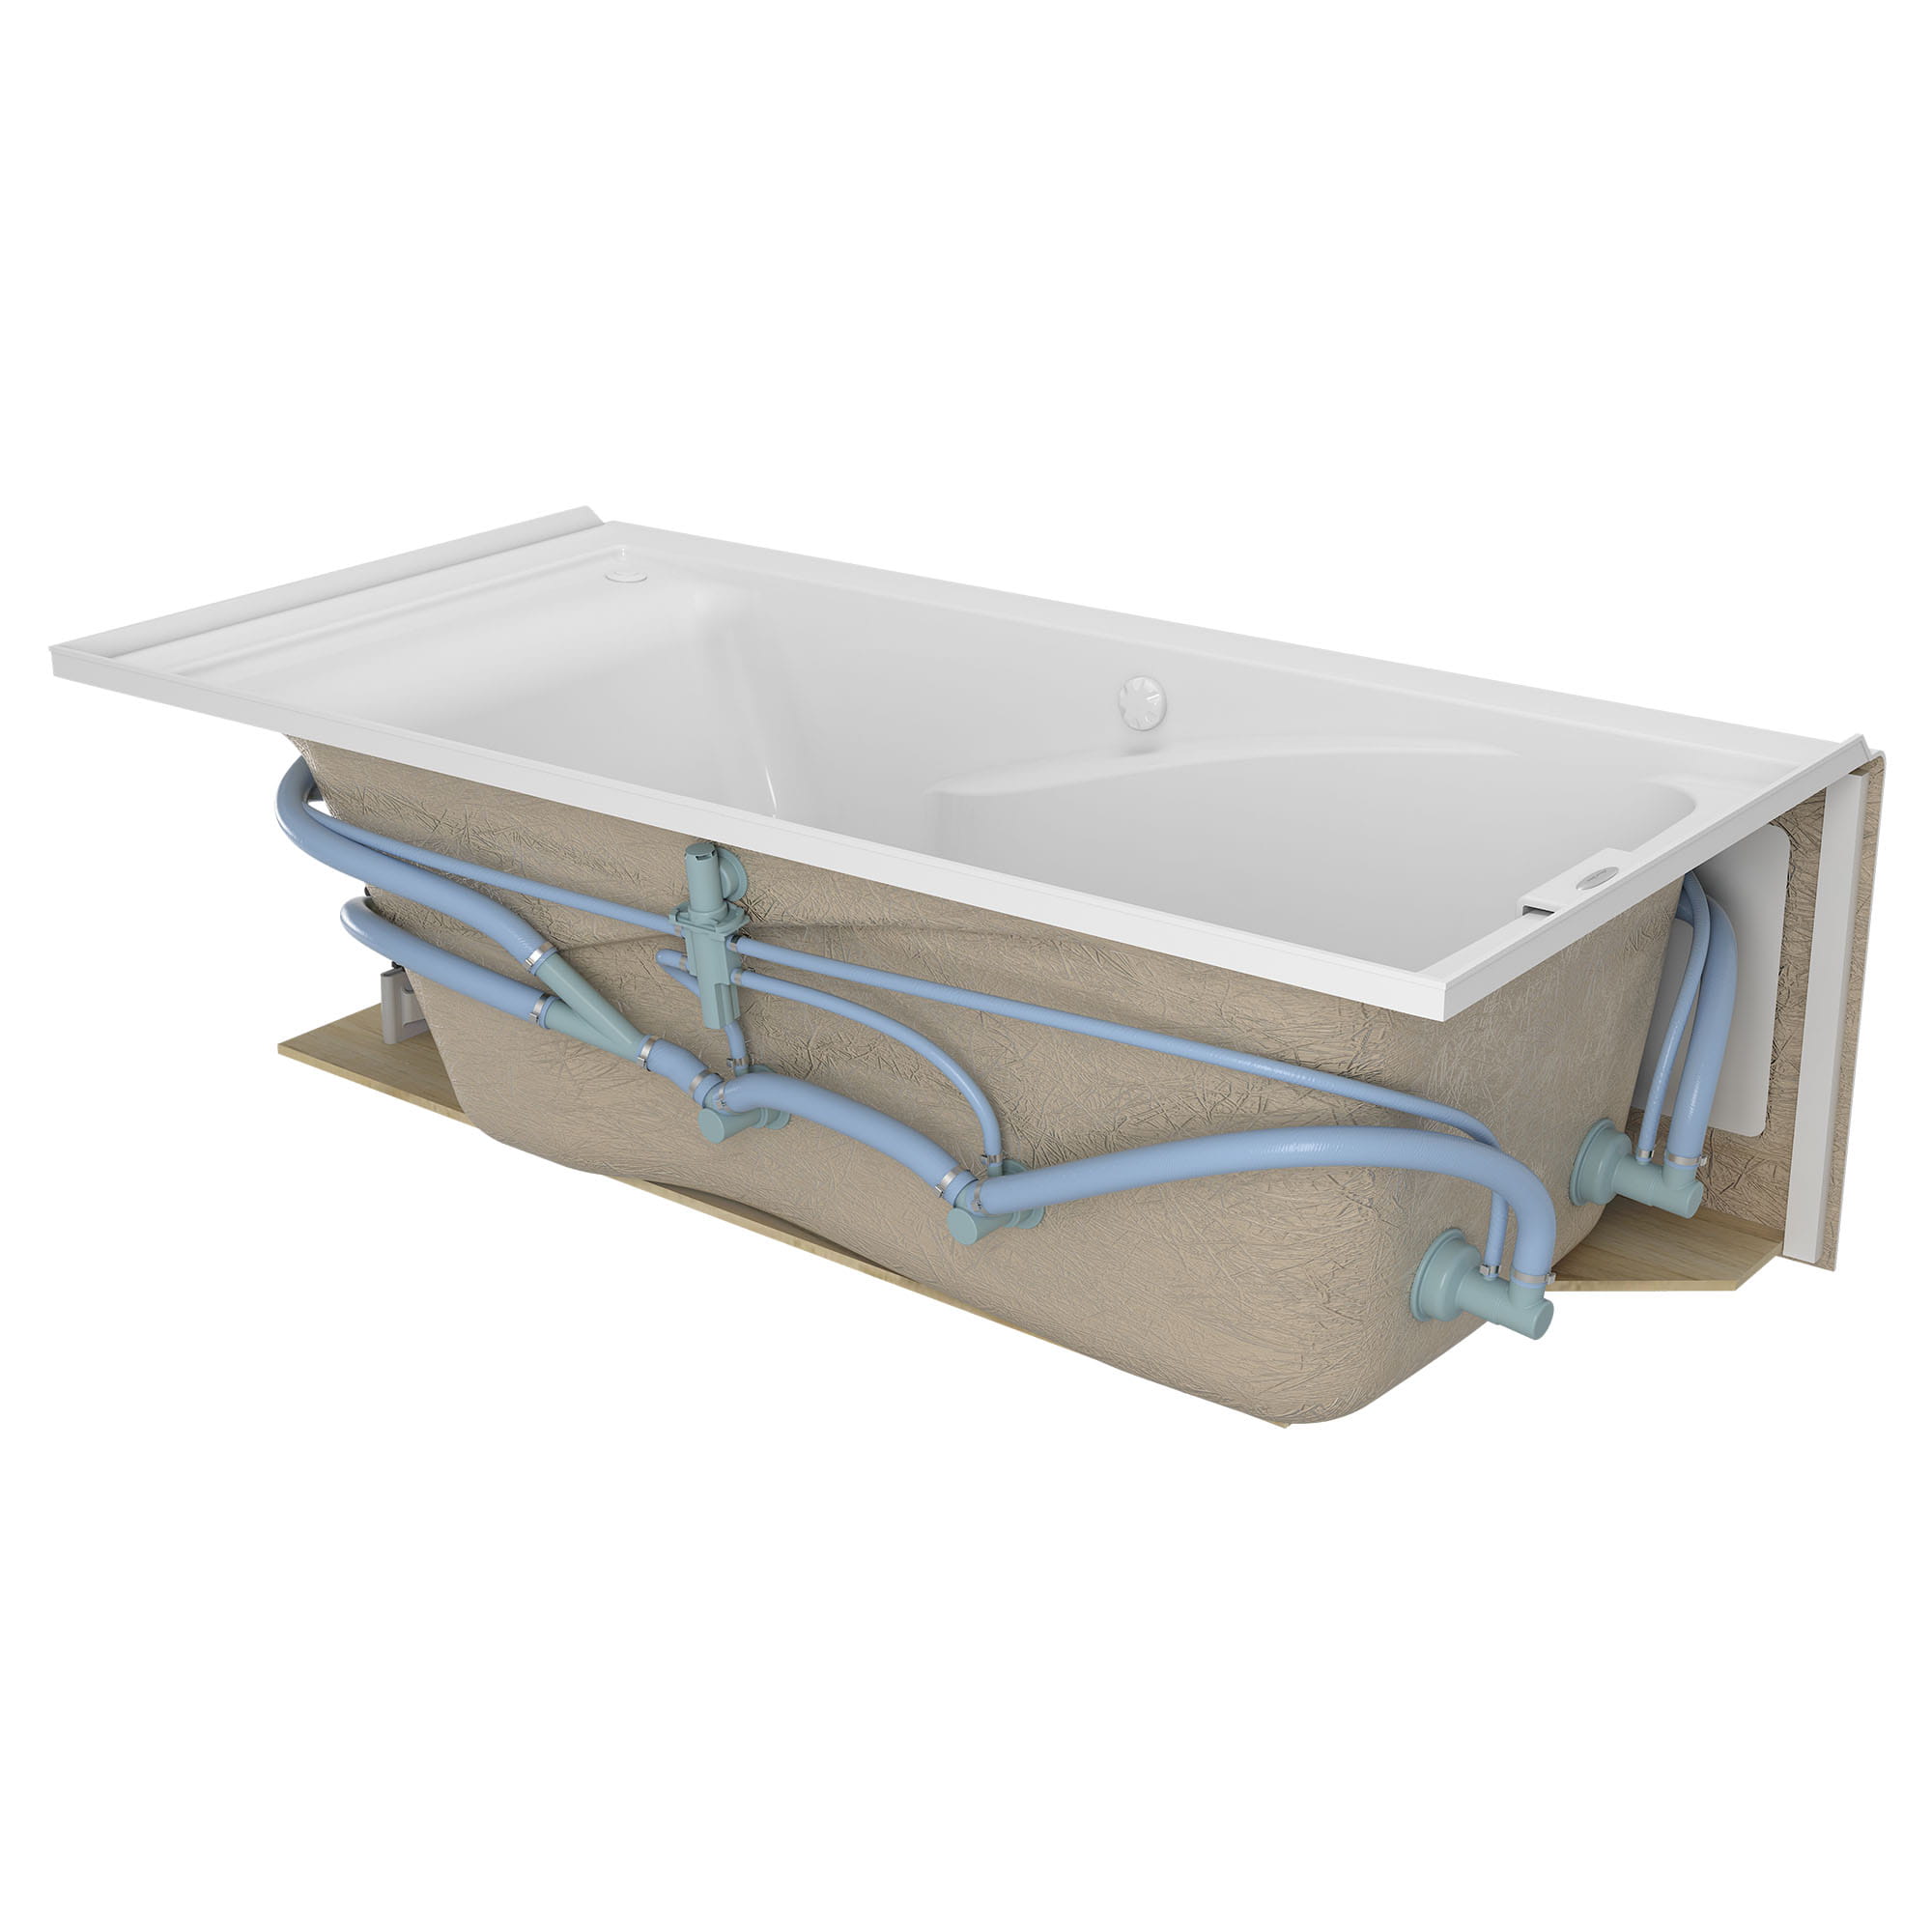 Mainstream 60in x 32in 8 Jet Whirlpool Tub with Right Hand Drain WHITE